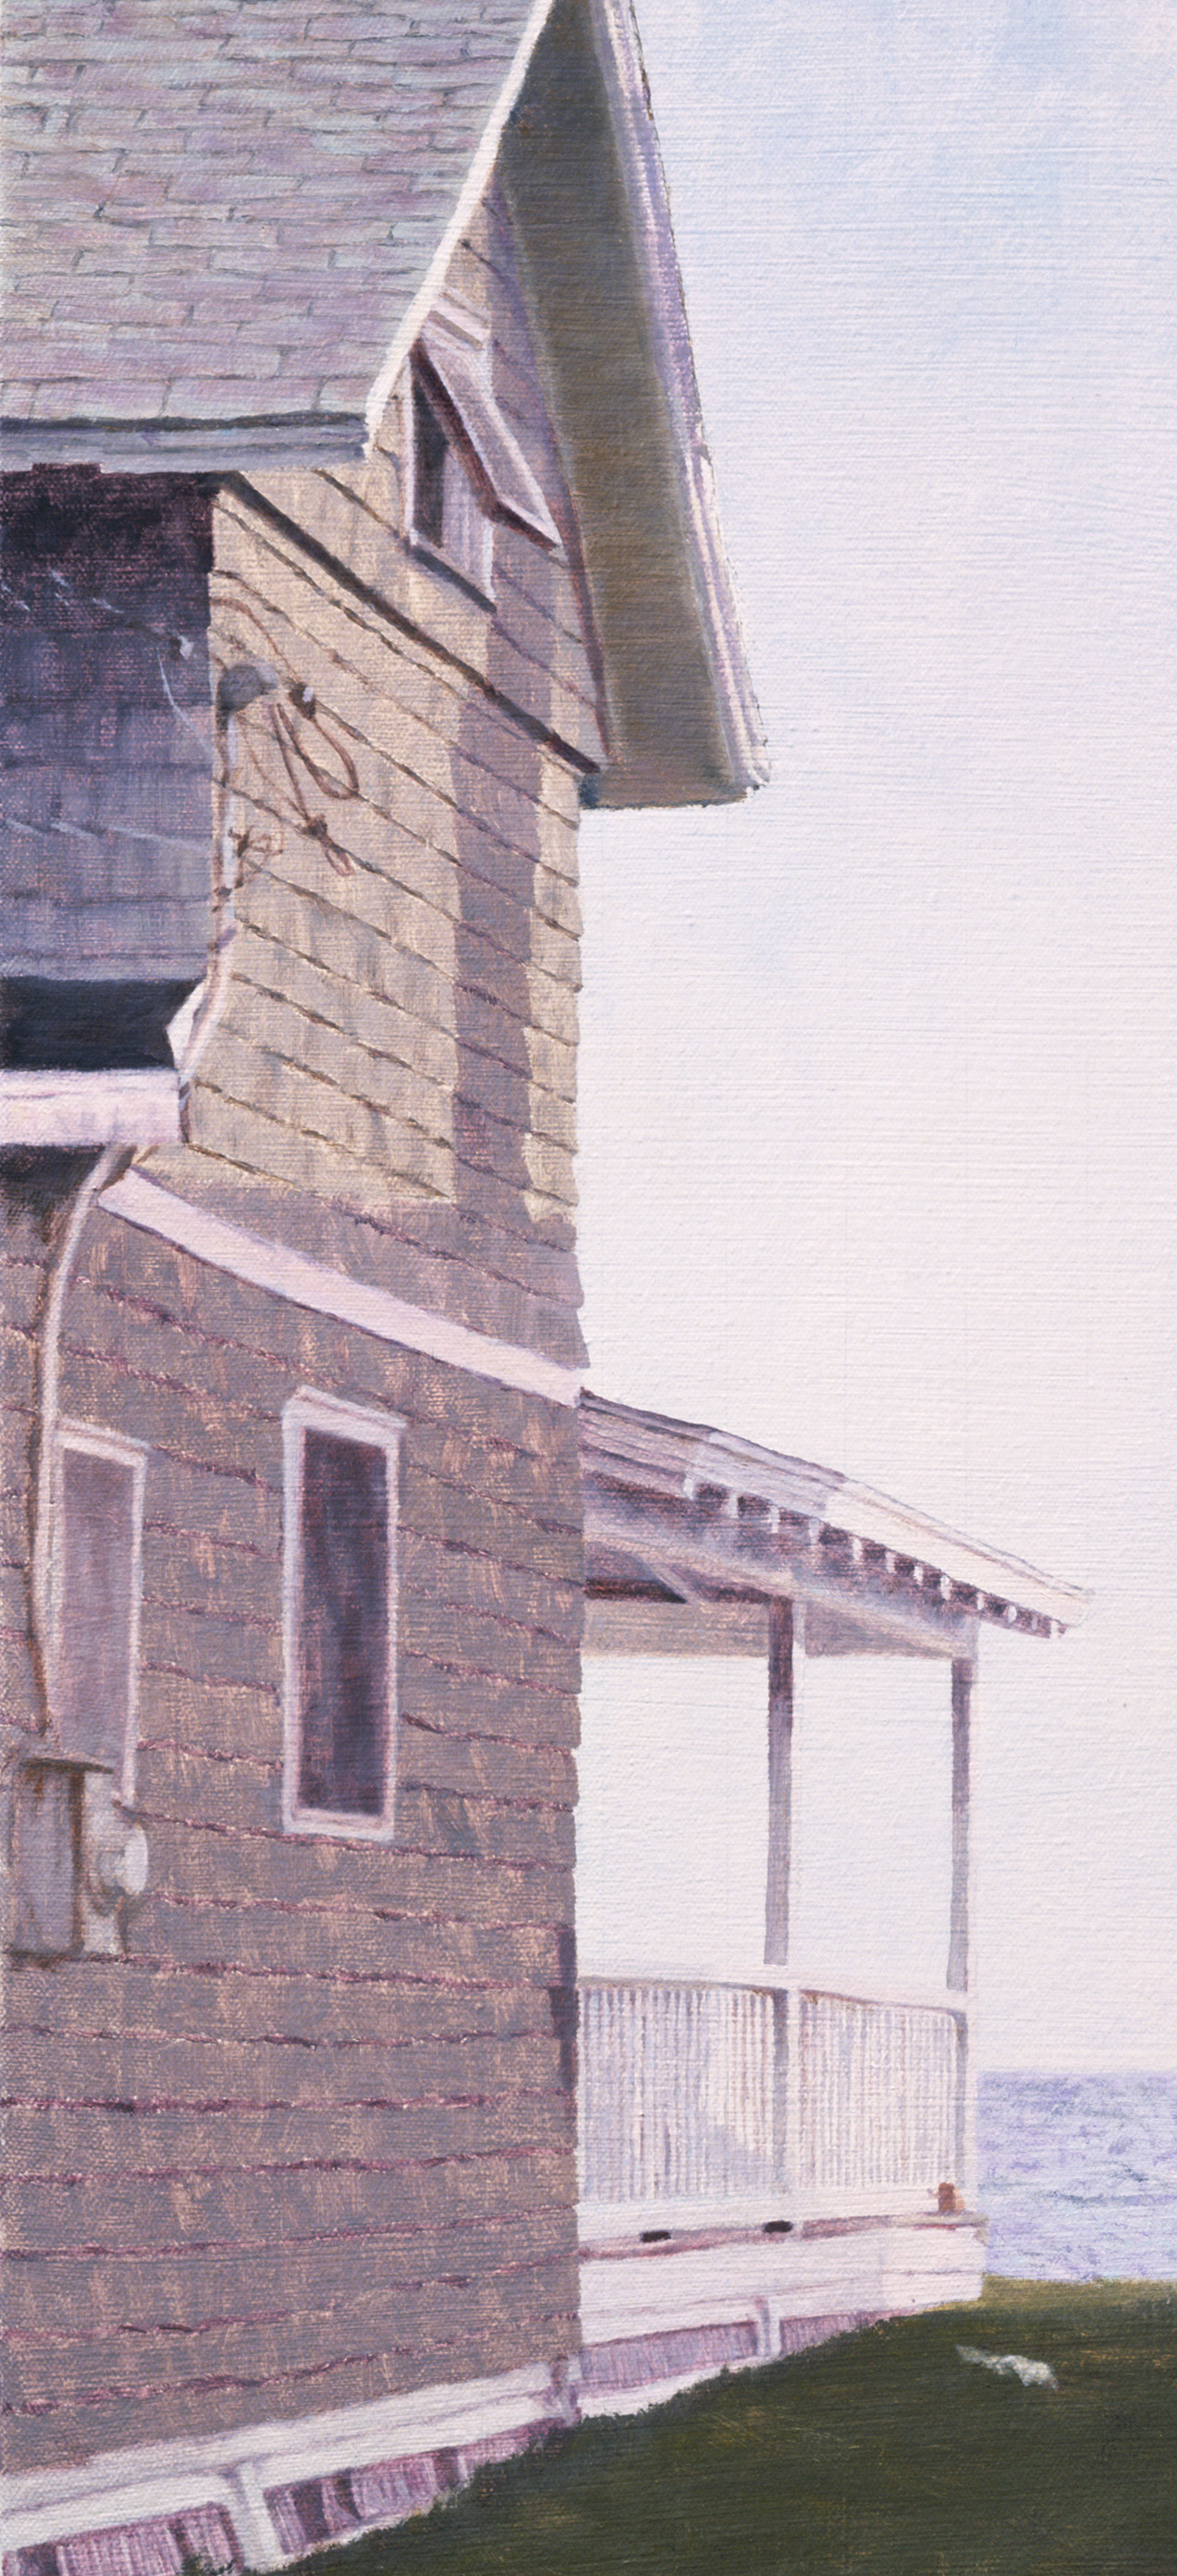   Between 2 Houses &nbsp;(Detail), 2006 Oil on linen 40 x 27 inches 